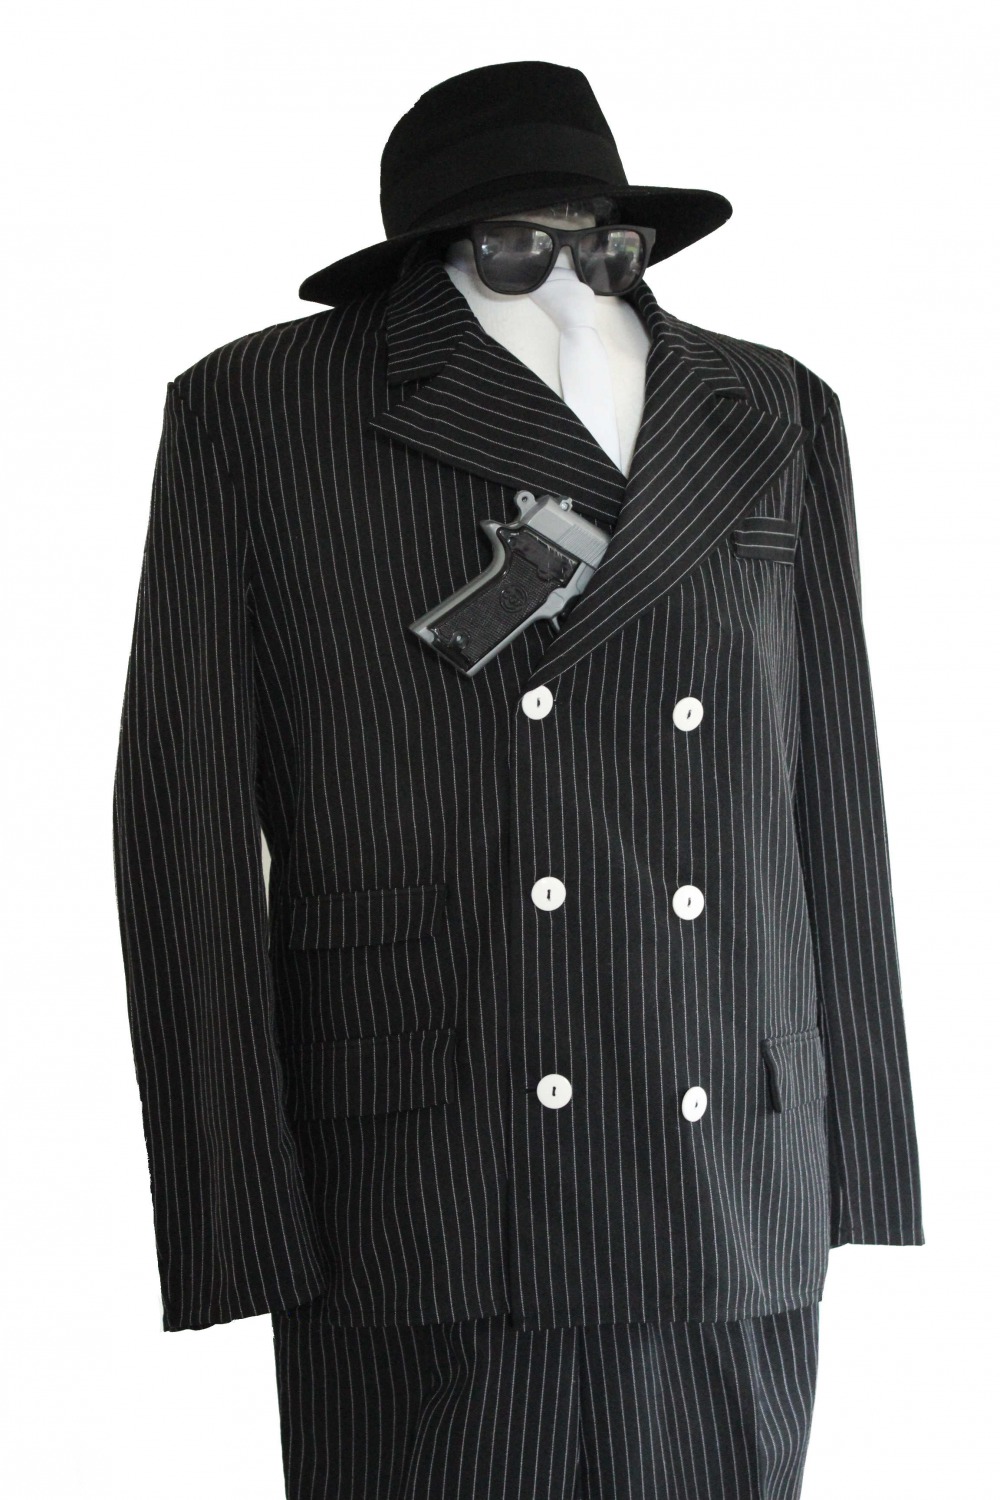 Men's 1920s 1930s Gangster Costume - Complete Costumes, Costume Hire